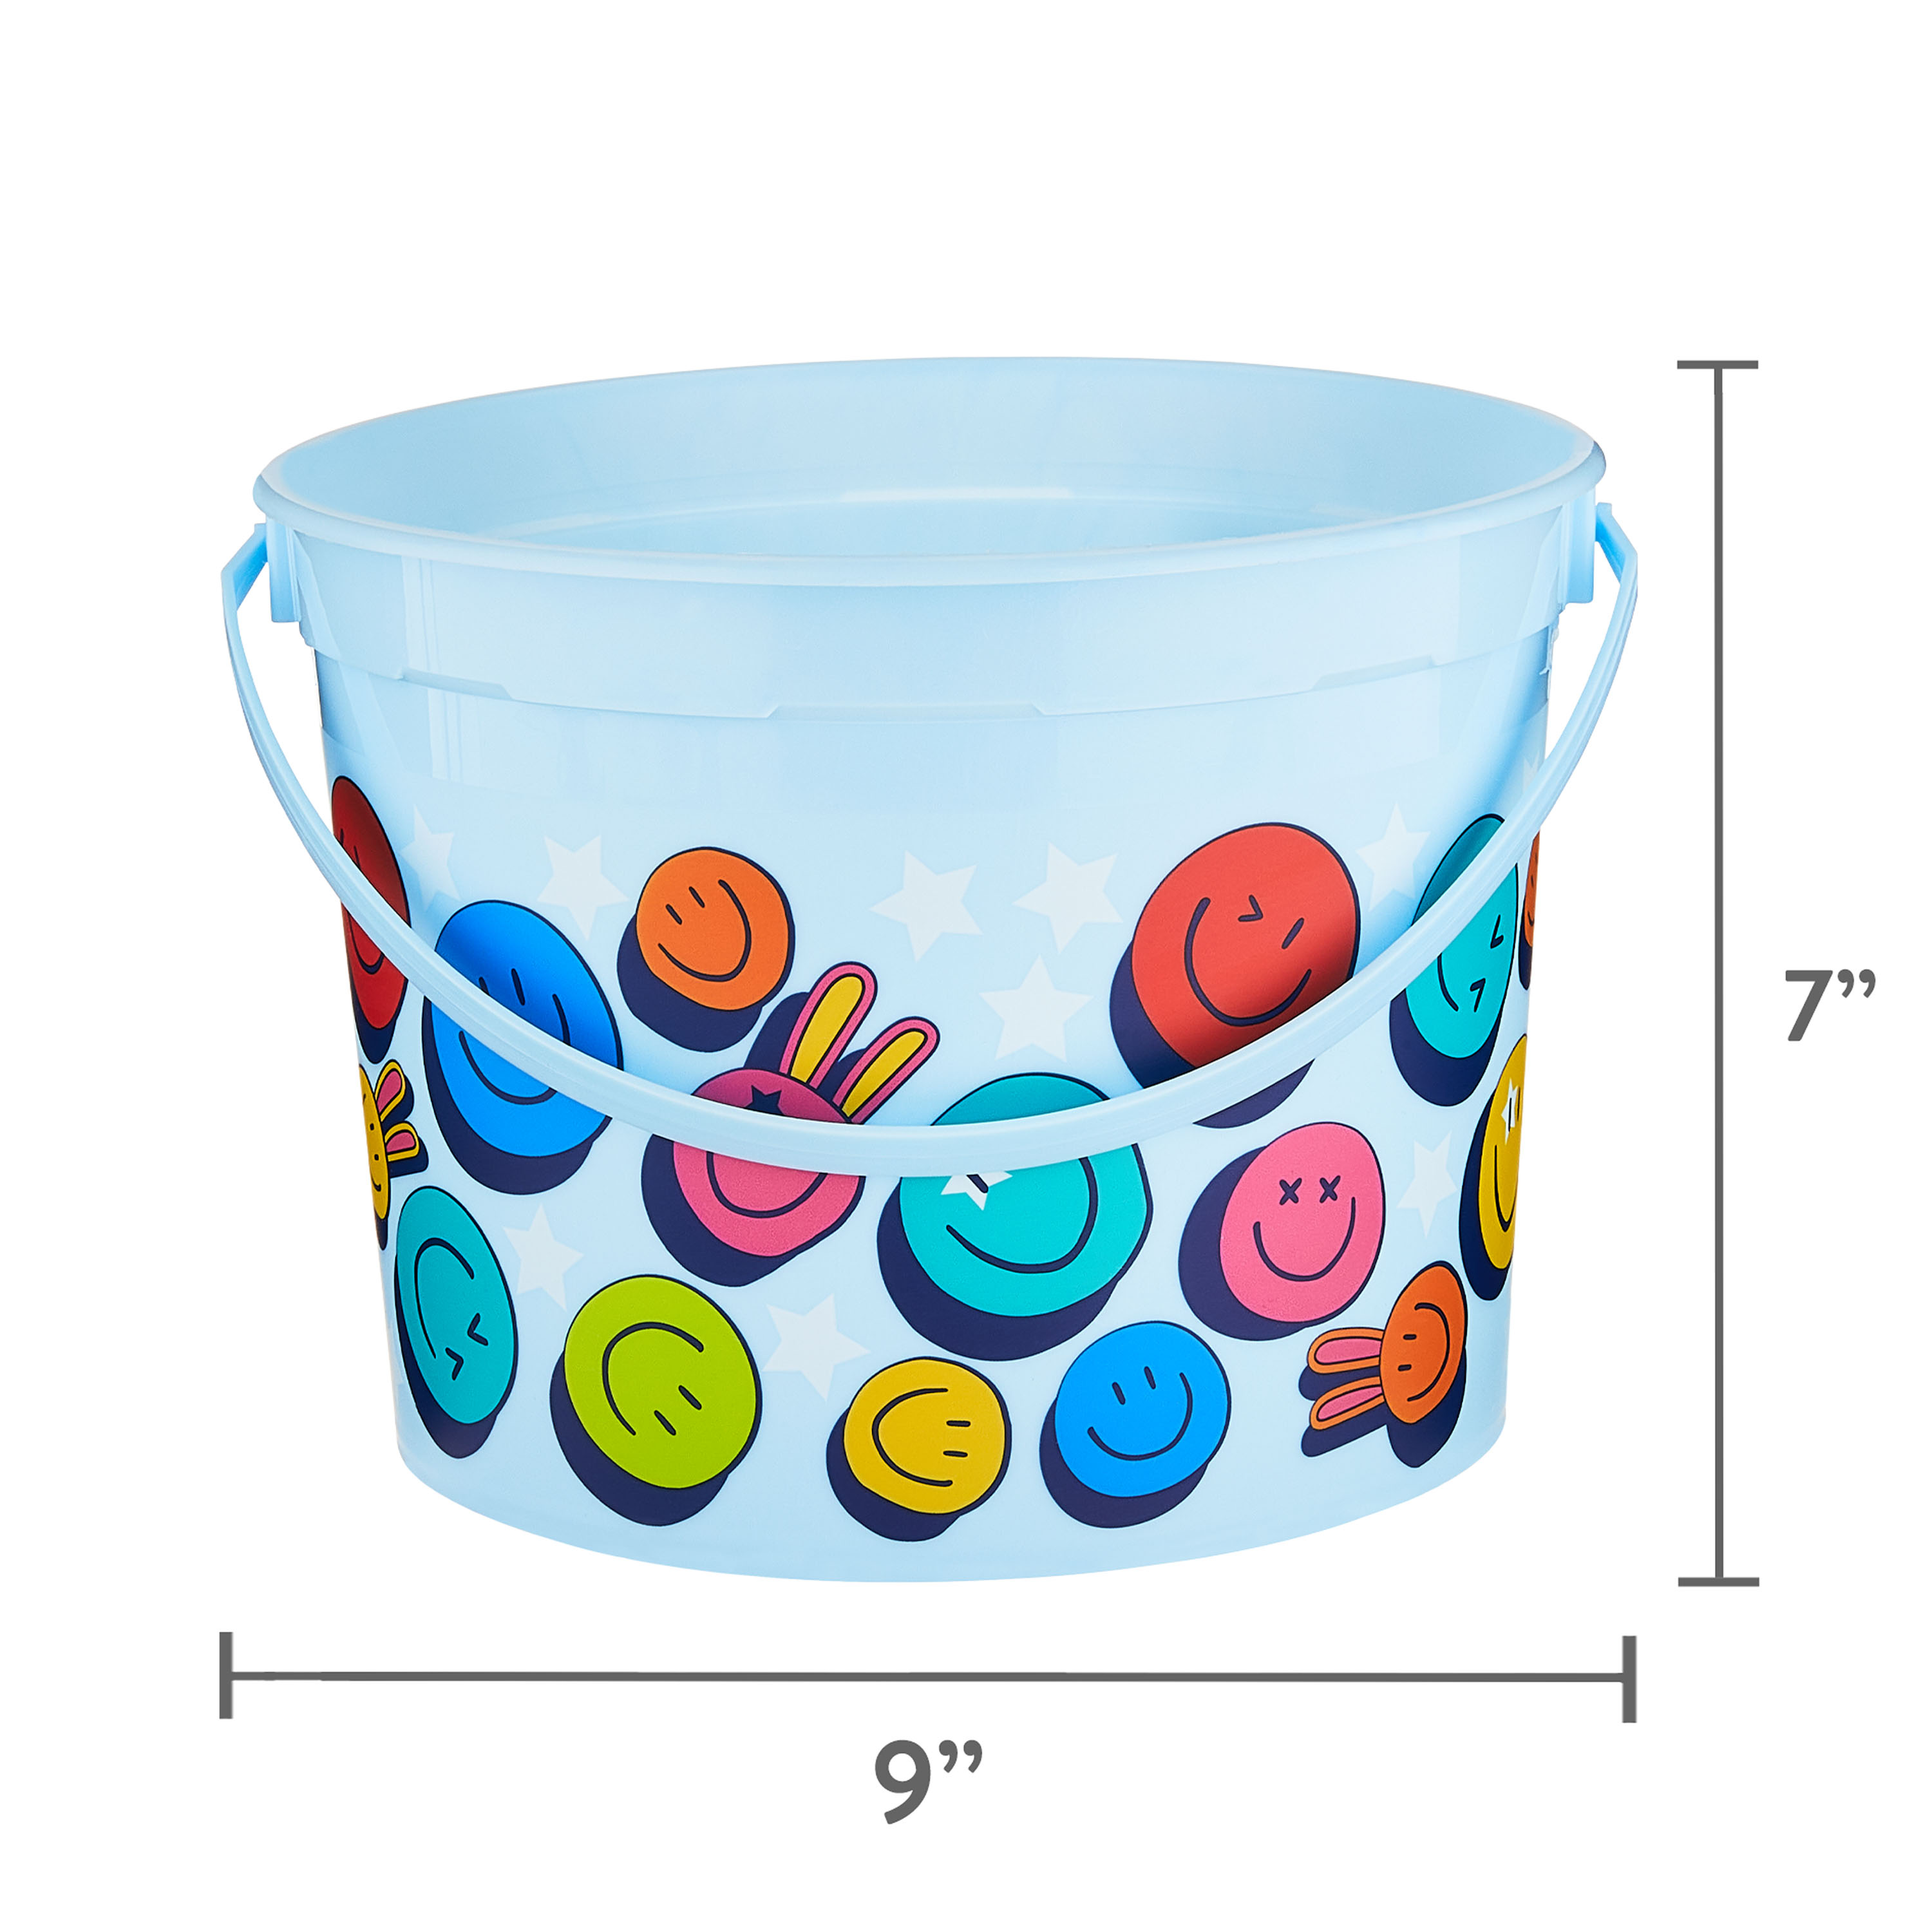 Easter 5-Quart Plastic Bucket, Blue Smileys, by Way To Celebrate - image 5 of 5